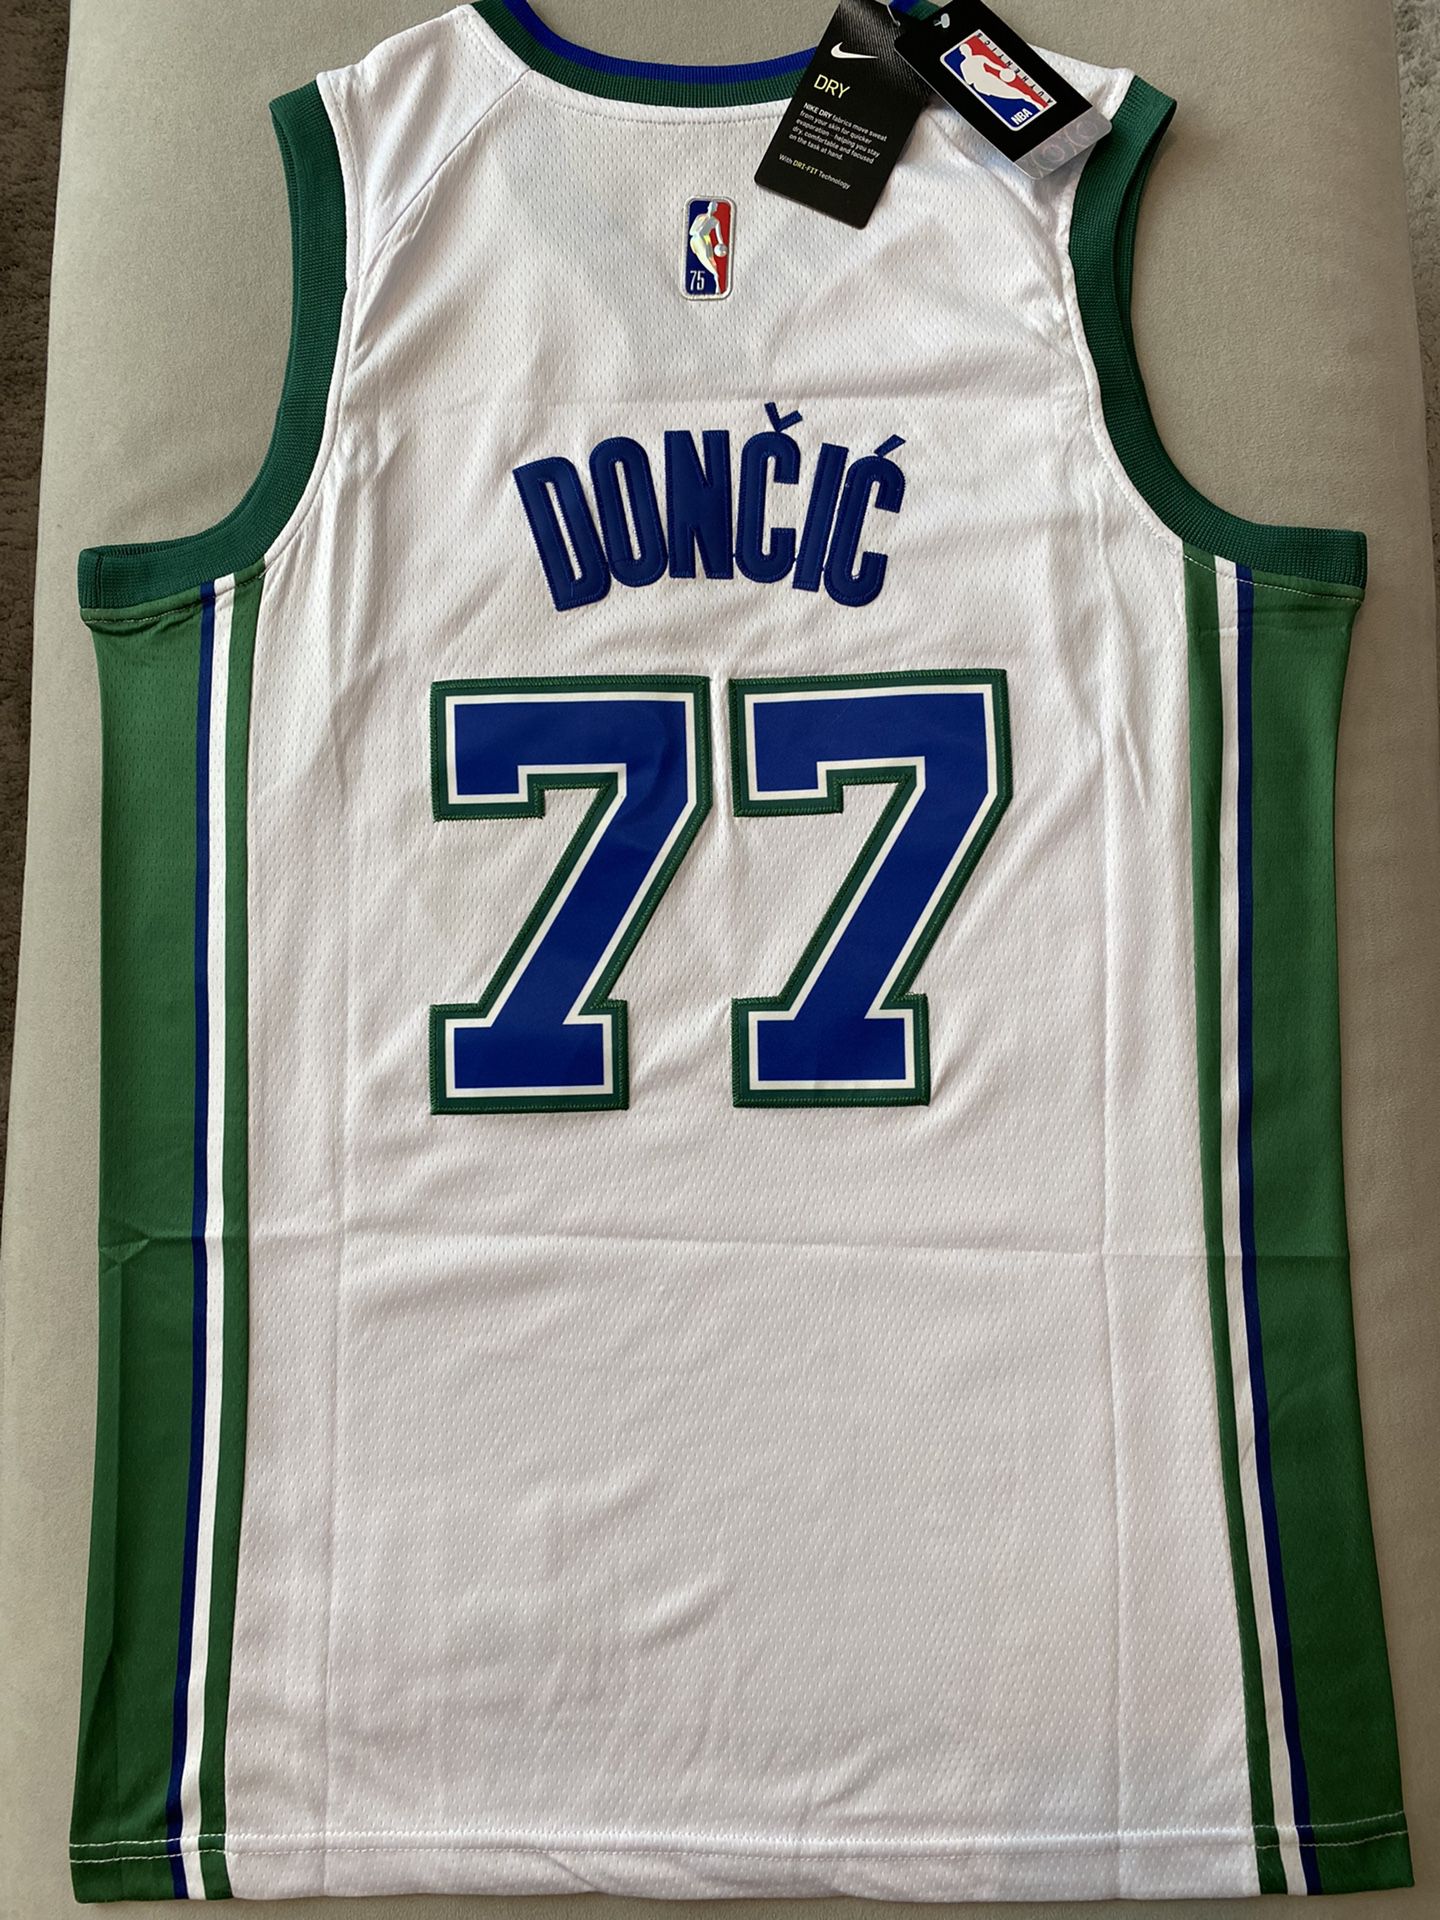 Dallas Mavericks Luka Doncic Jersey for Sale in Los Angeles, CA - OfferUp